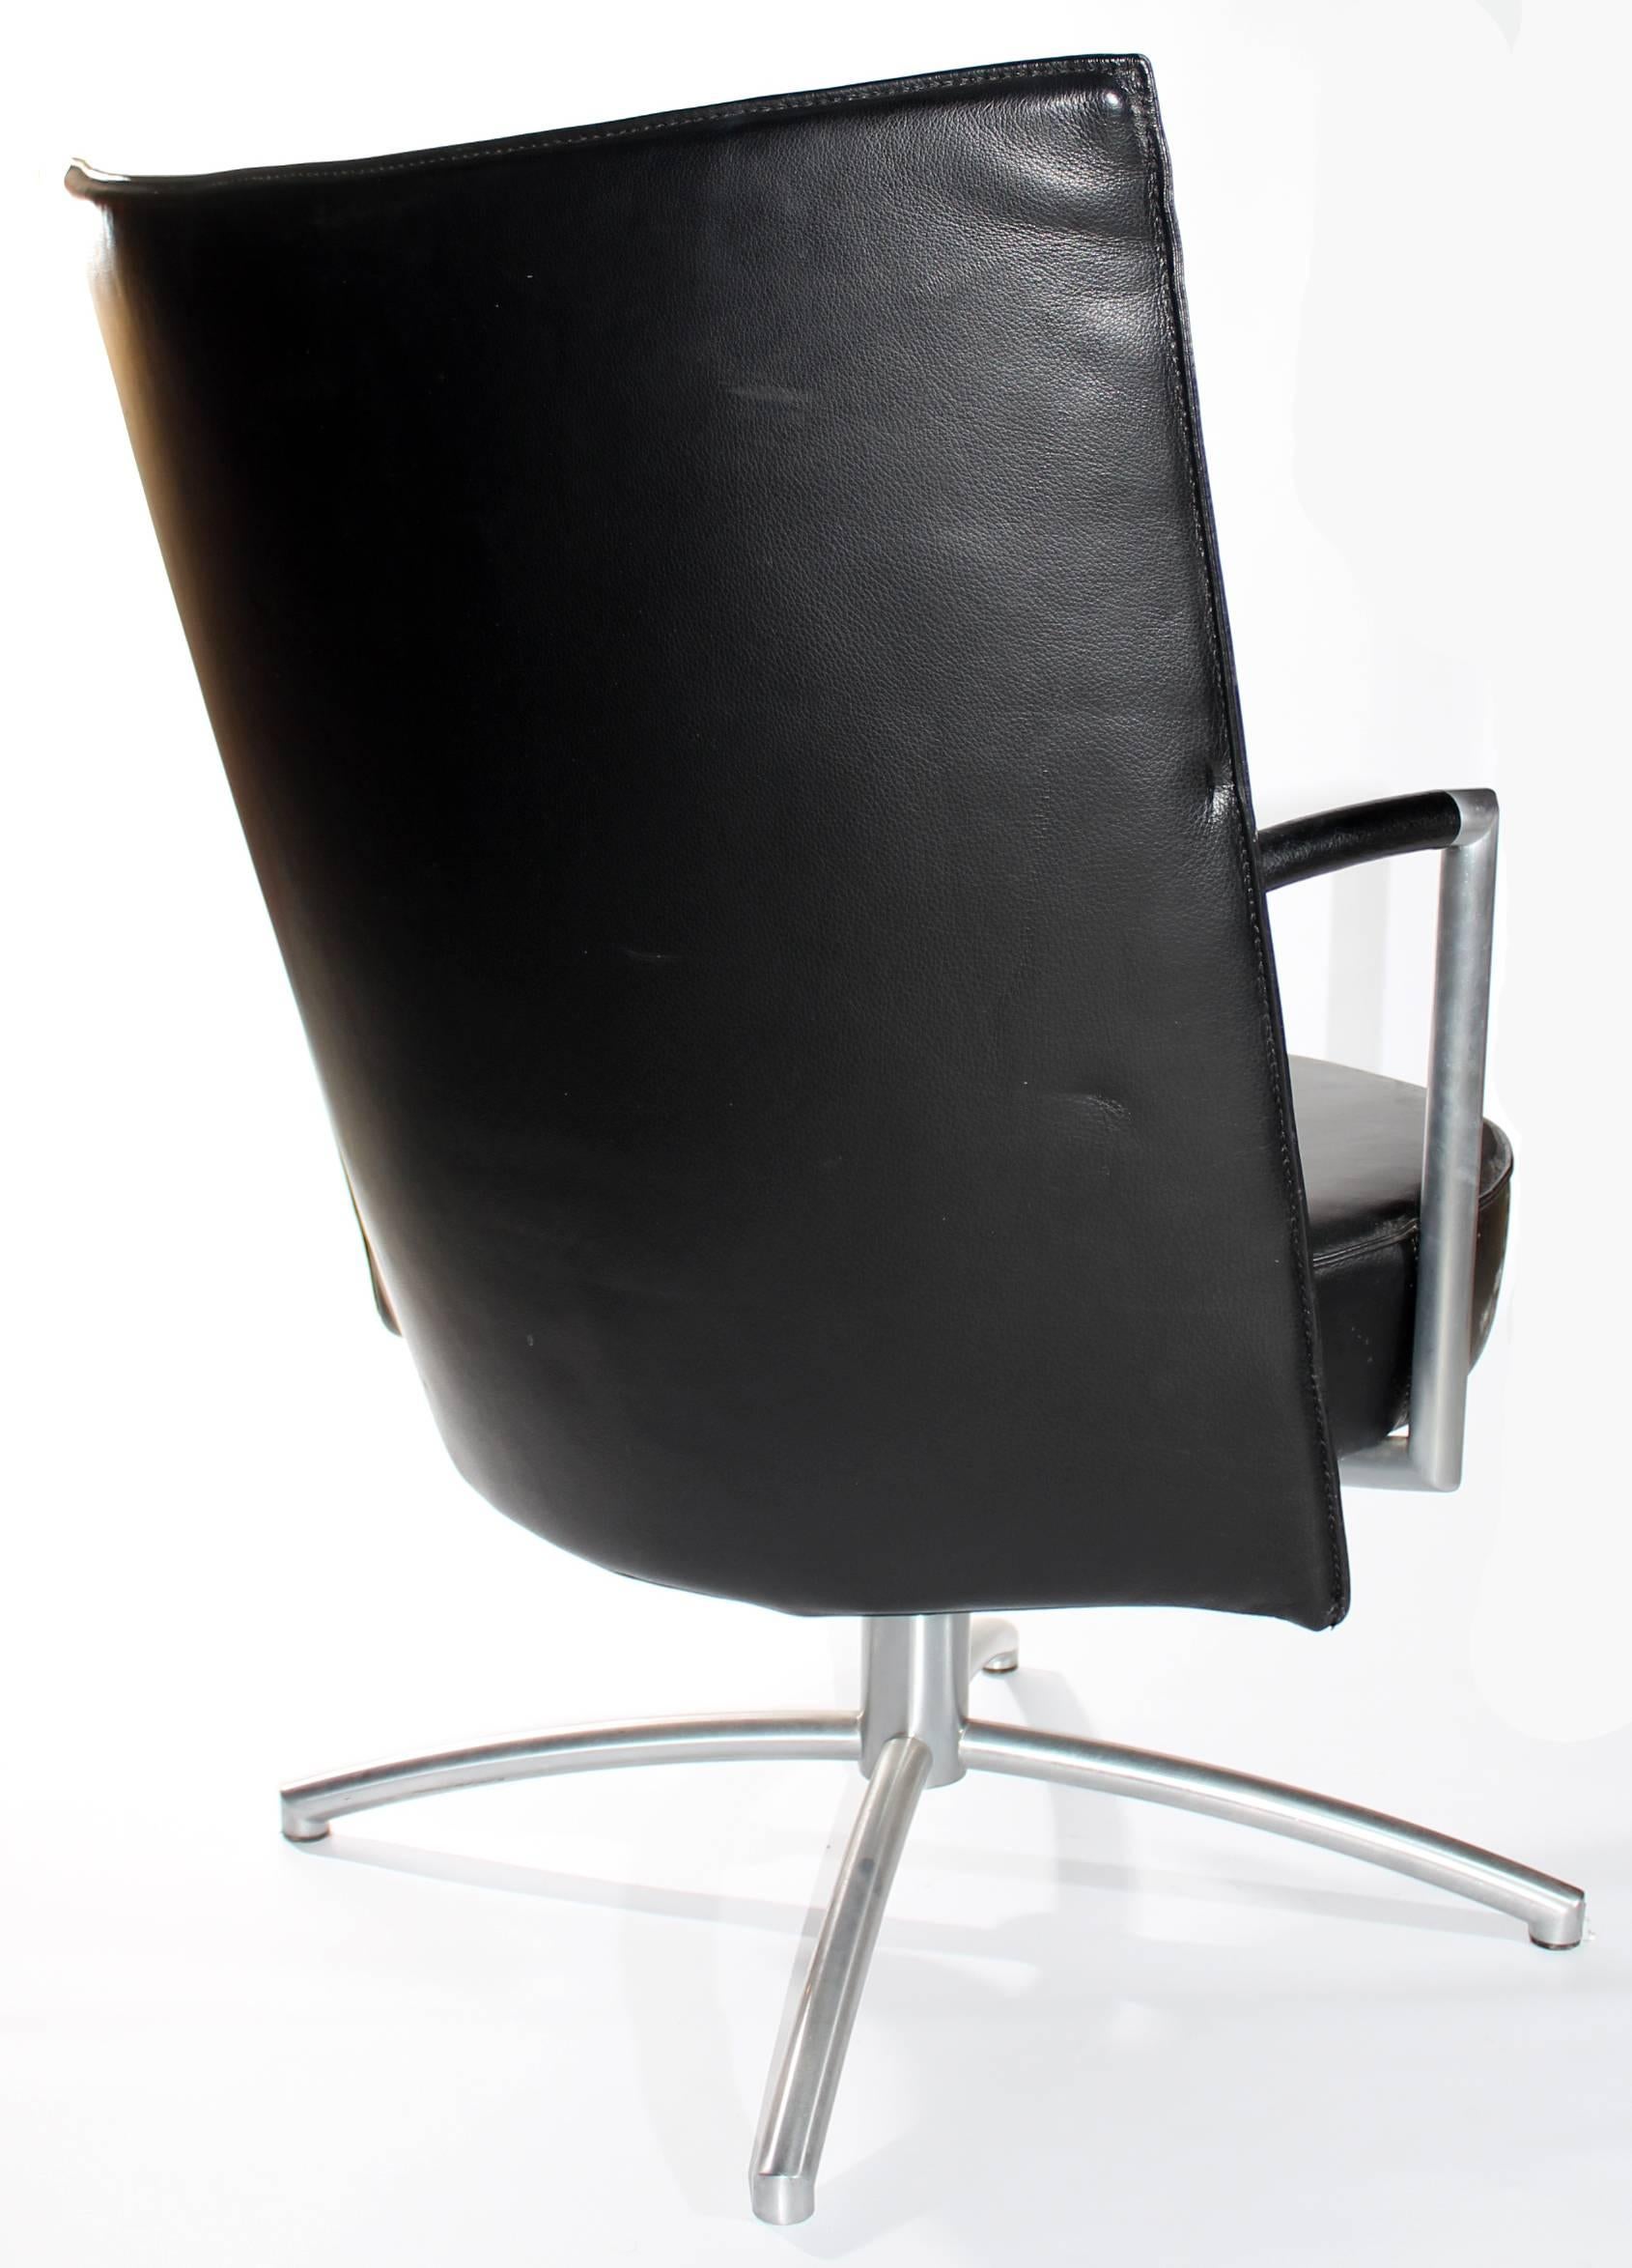 Danish Foersom & Hiort-Lorentzen Leather and Stainless Steel Club Chair